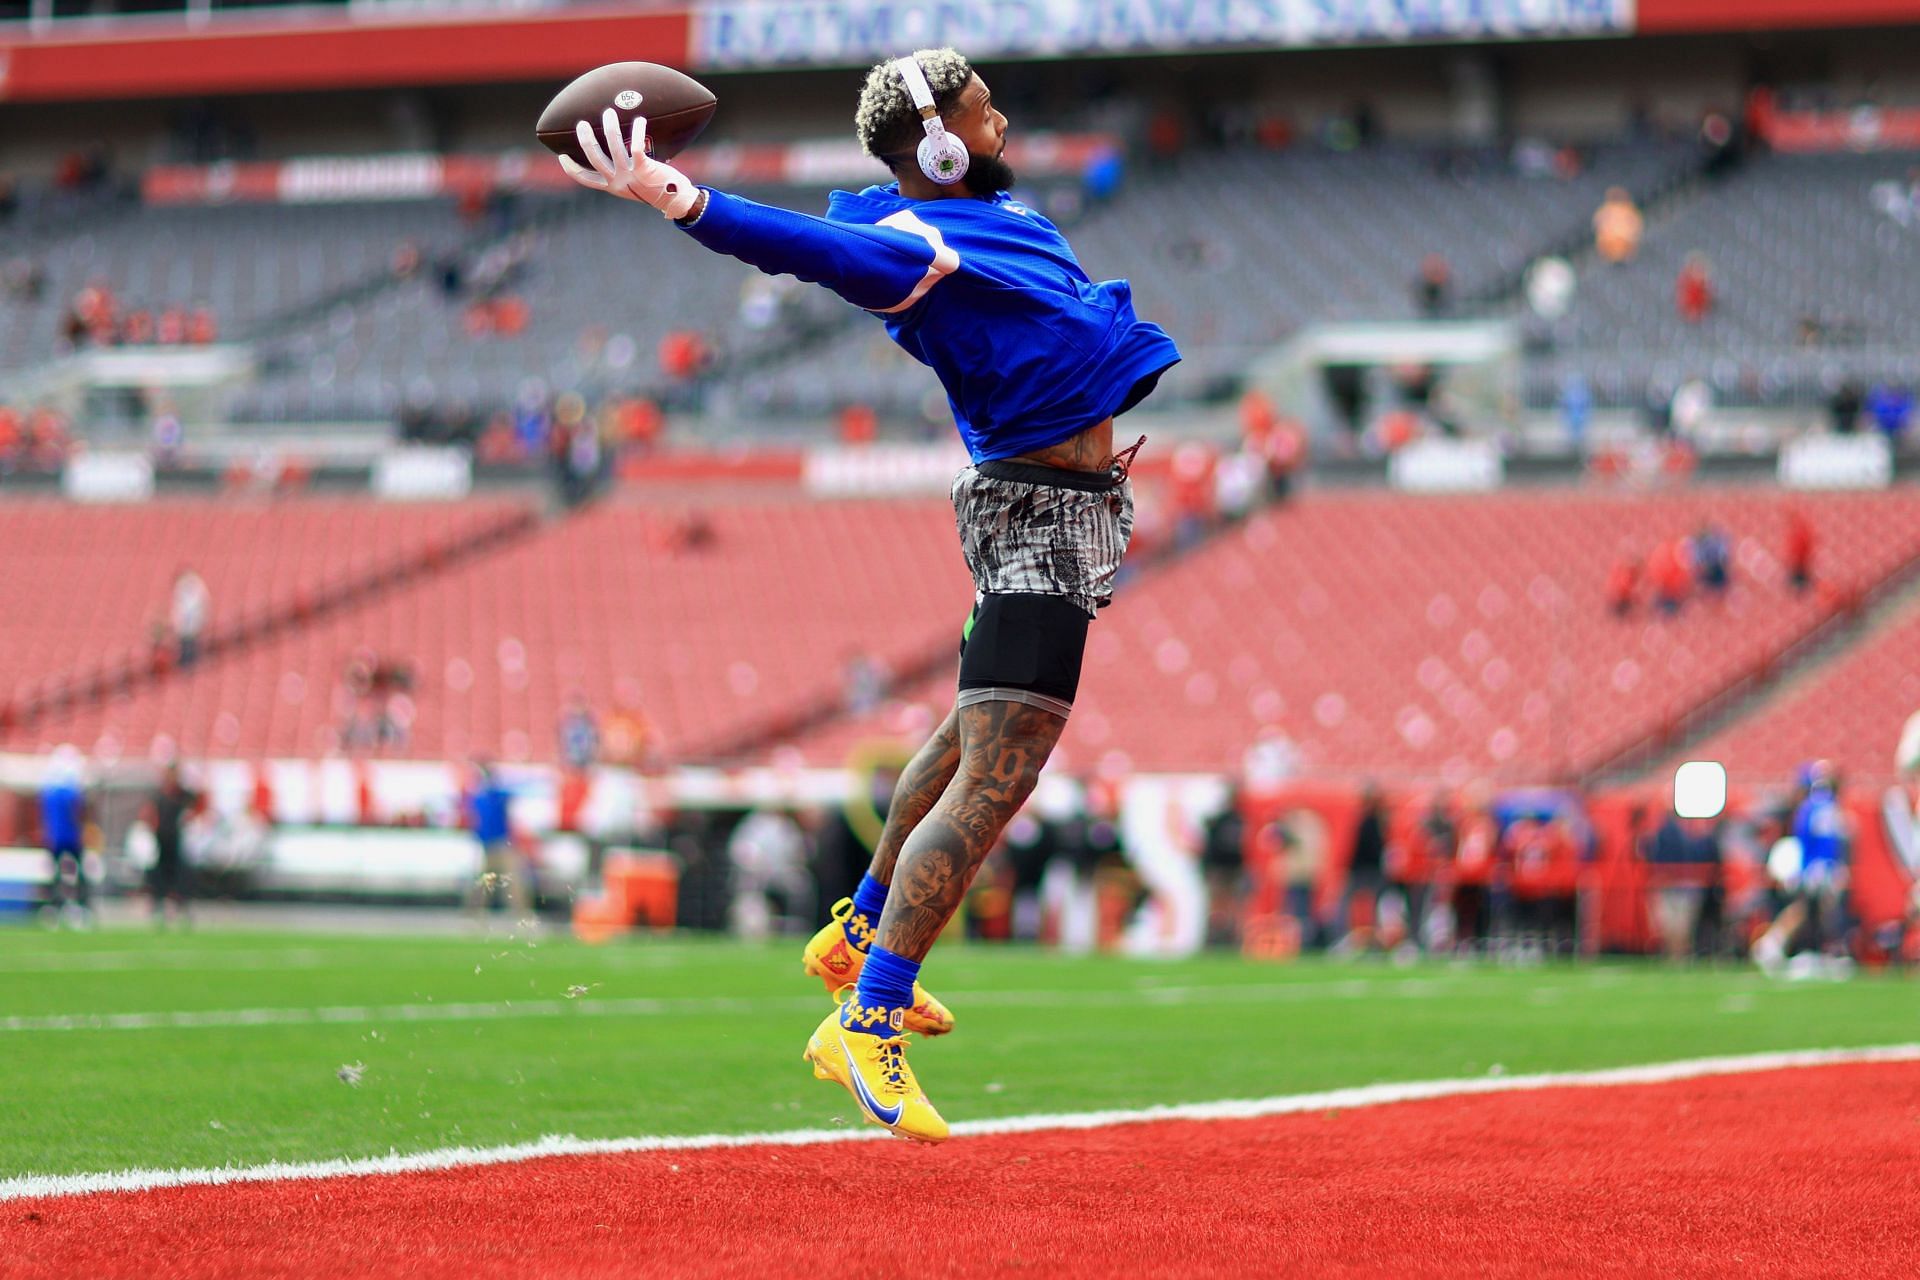 There is still a productive receiver in Odell Beckham